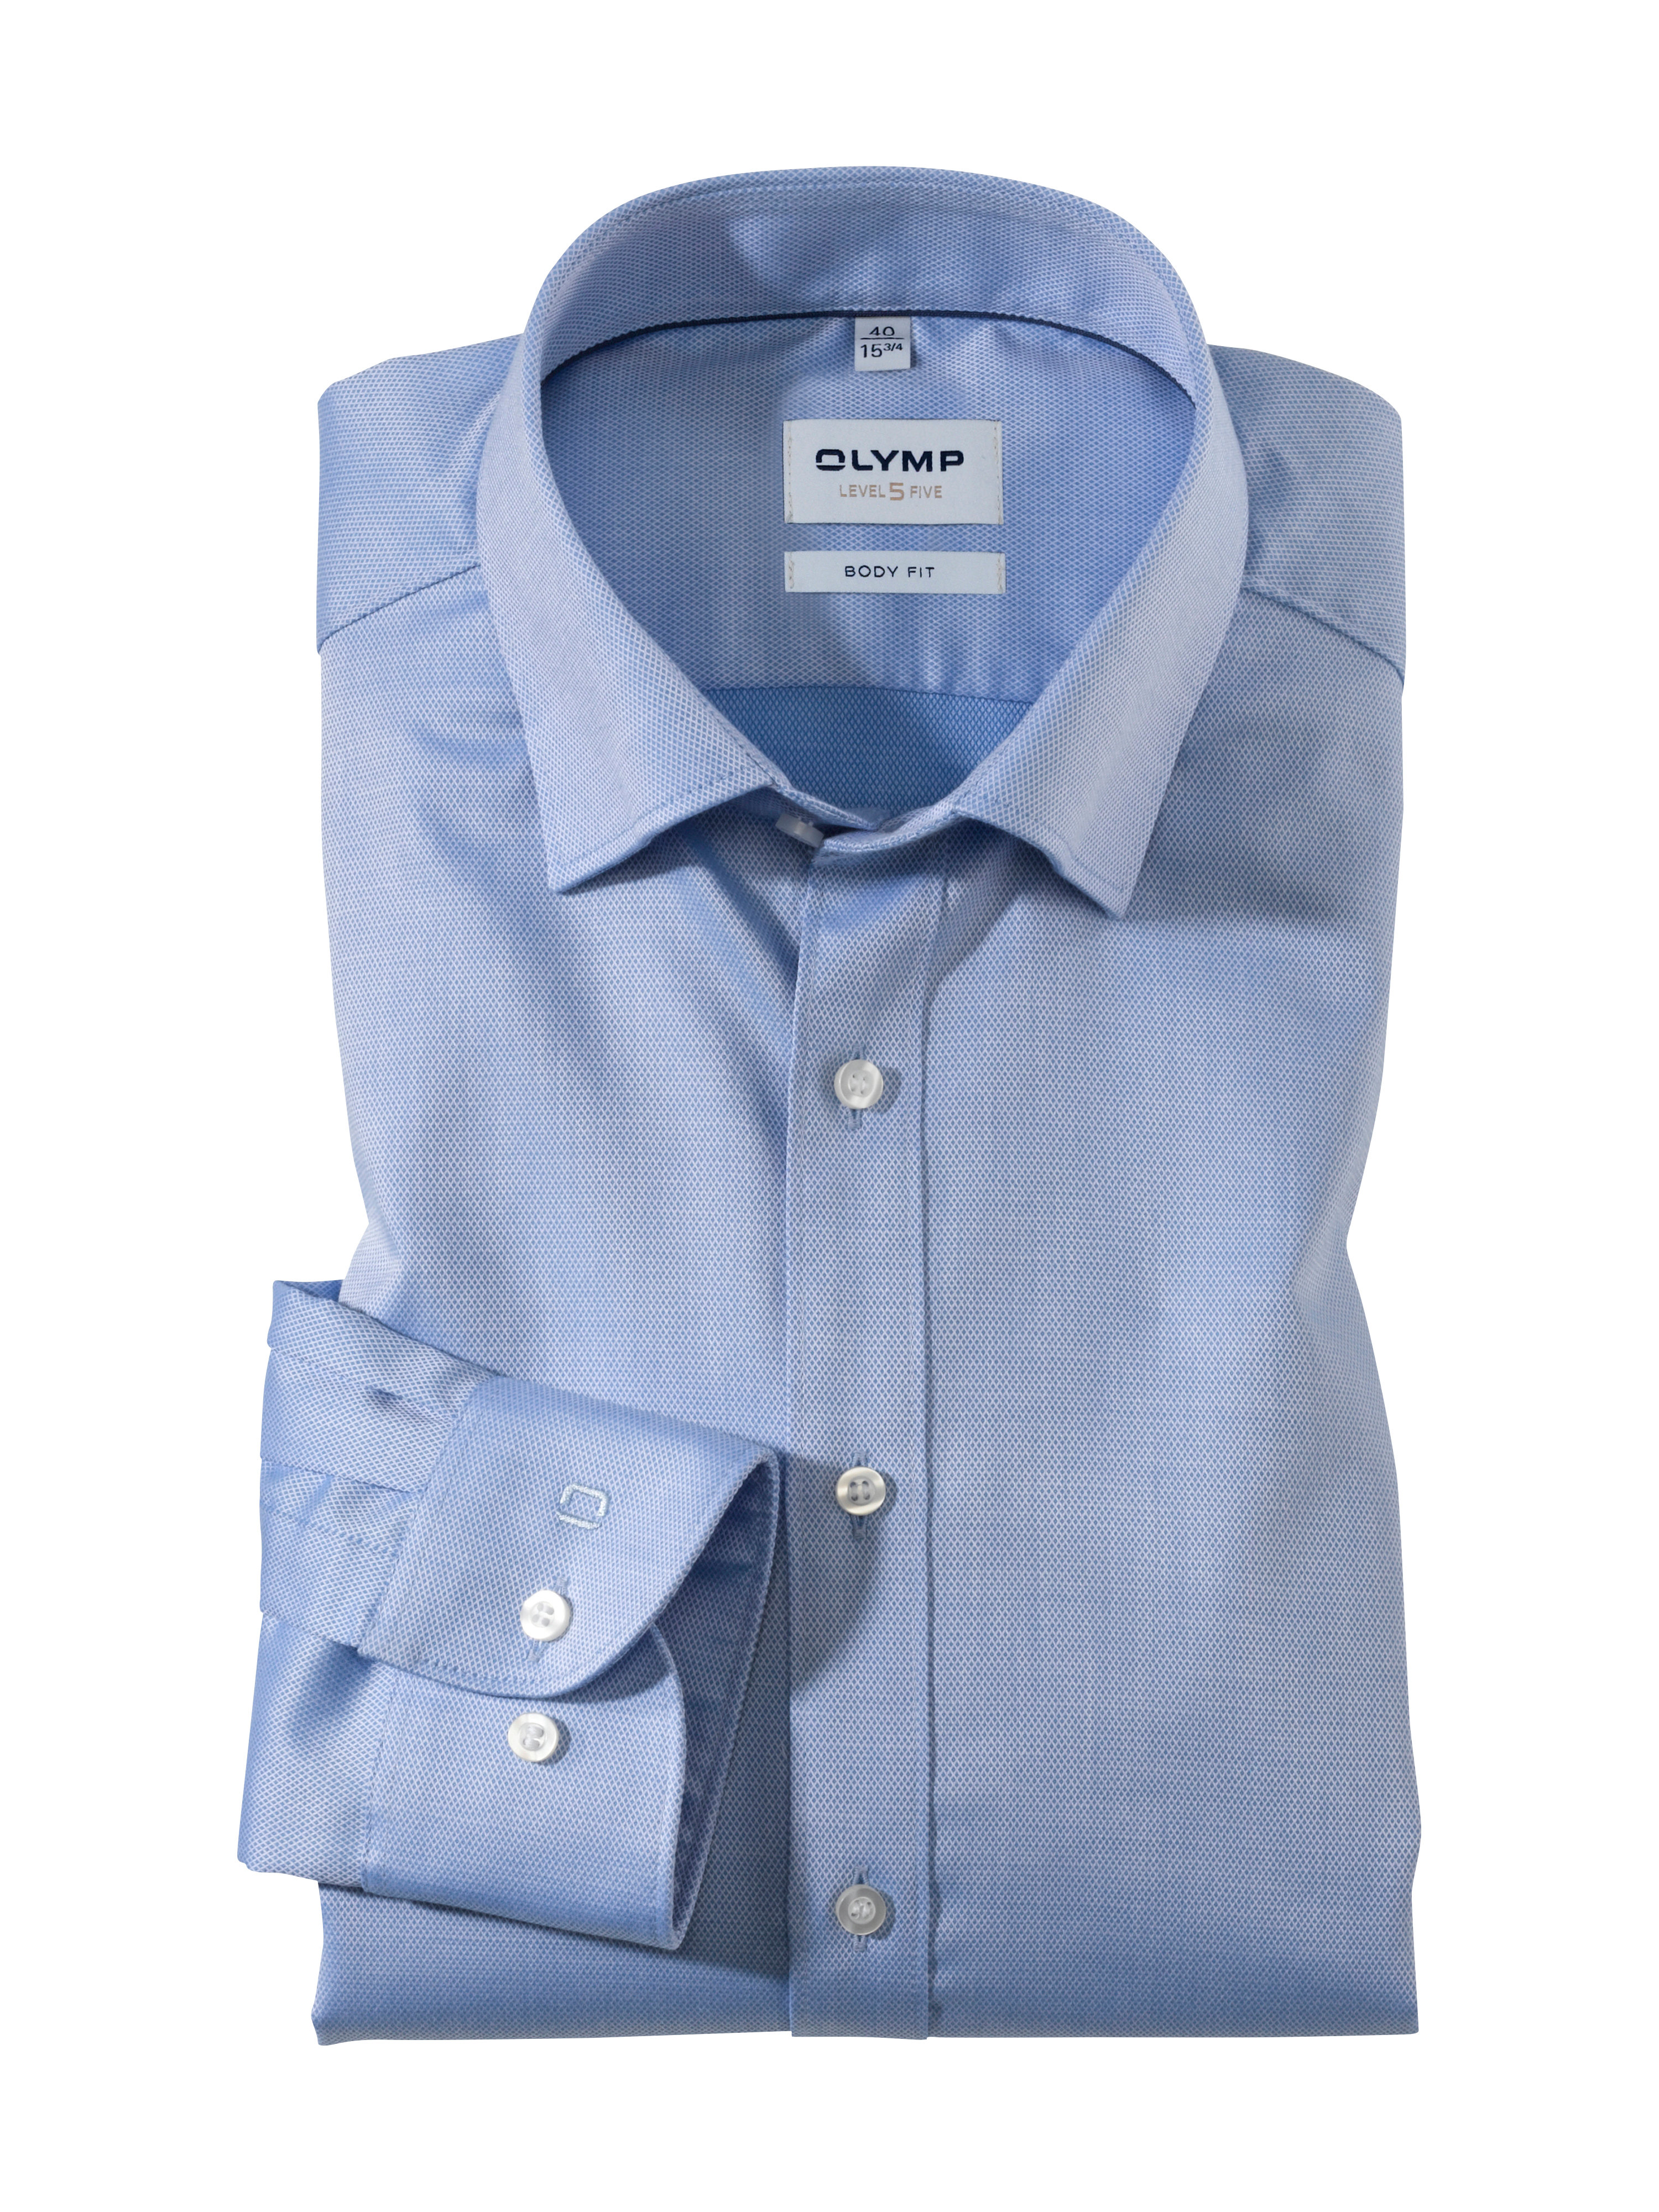 Business shirt | OLYMP Level Five, body fit, Under button-down | Blue -  04646415